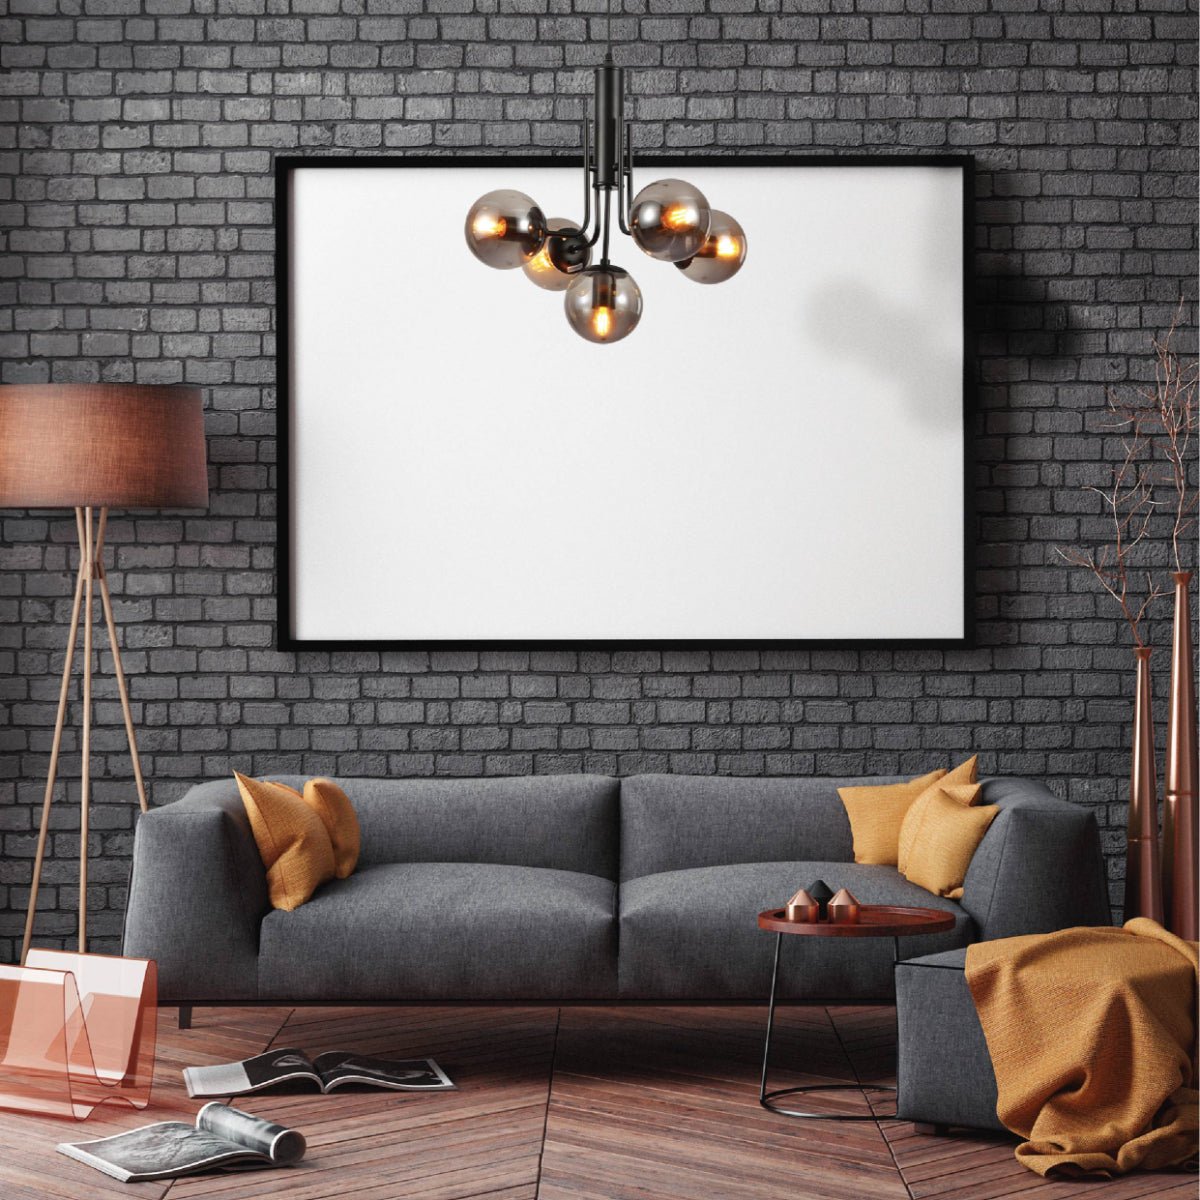 Indoor usage of Smoky Globe Glass Black Body Pendant Chandelier Ceiling Light with 5xE27s | TEKLED 159-17412